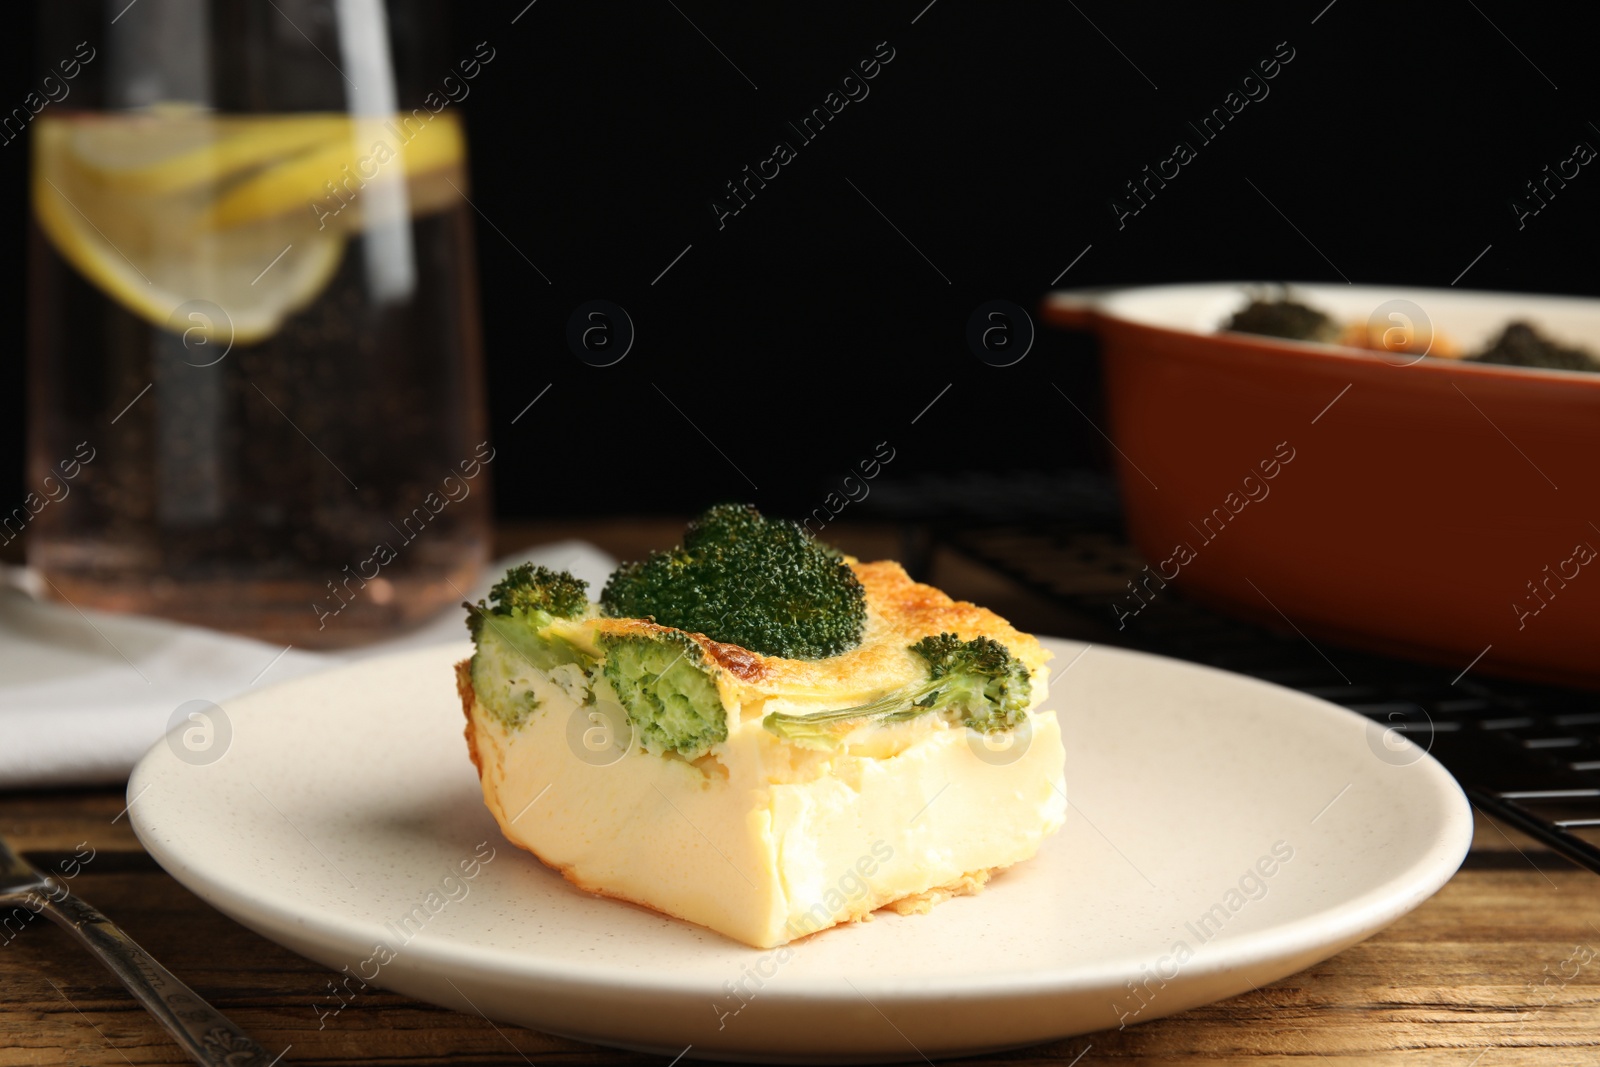 Photo of Tasty broccoli casserole served on wooden table